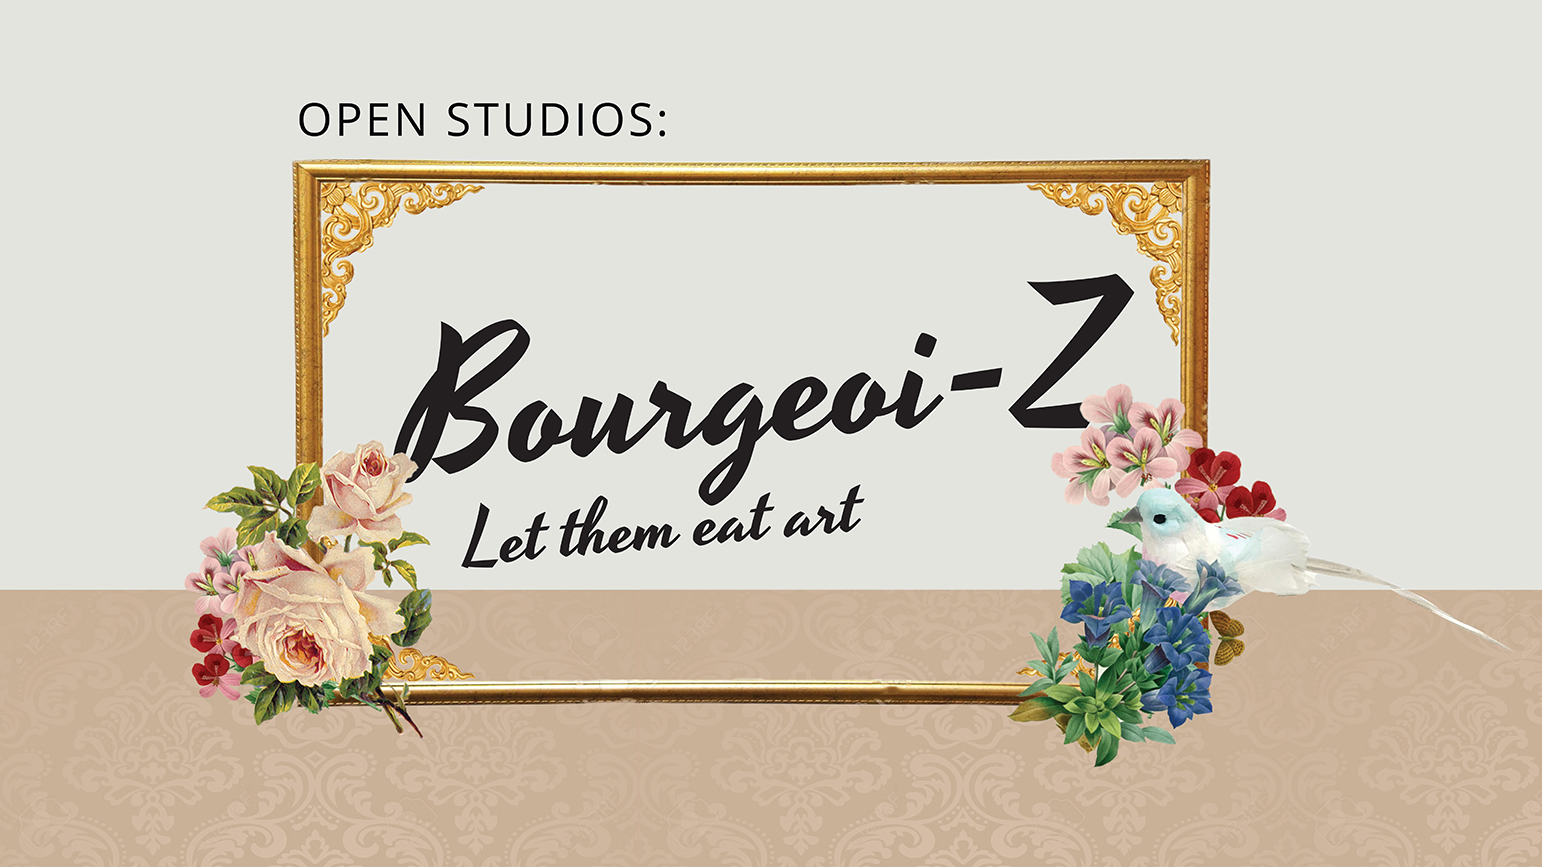 Gold frame with flowers and a bird with the text "Bourgeoi-Z Let them eat art" in the middle of the frame